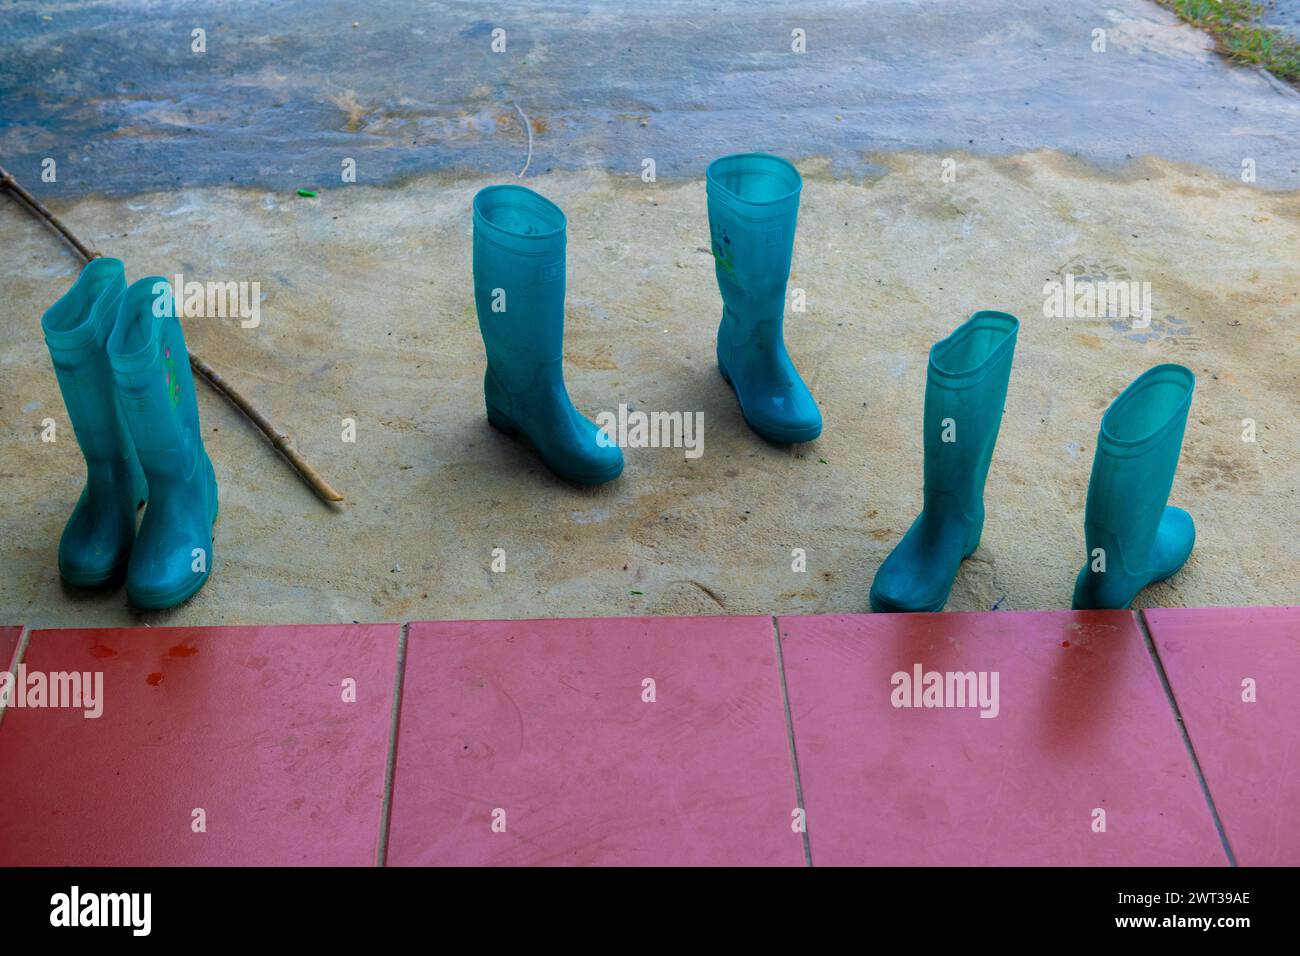 Still life of red tiles and three pairs of blue, rubber, waterproof boots worn by Hmong women who guide treks through the damp and muddy mountain regi Stock Photo